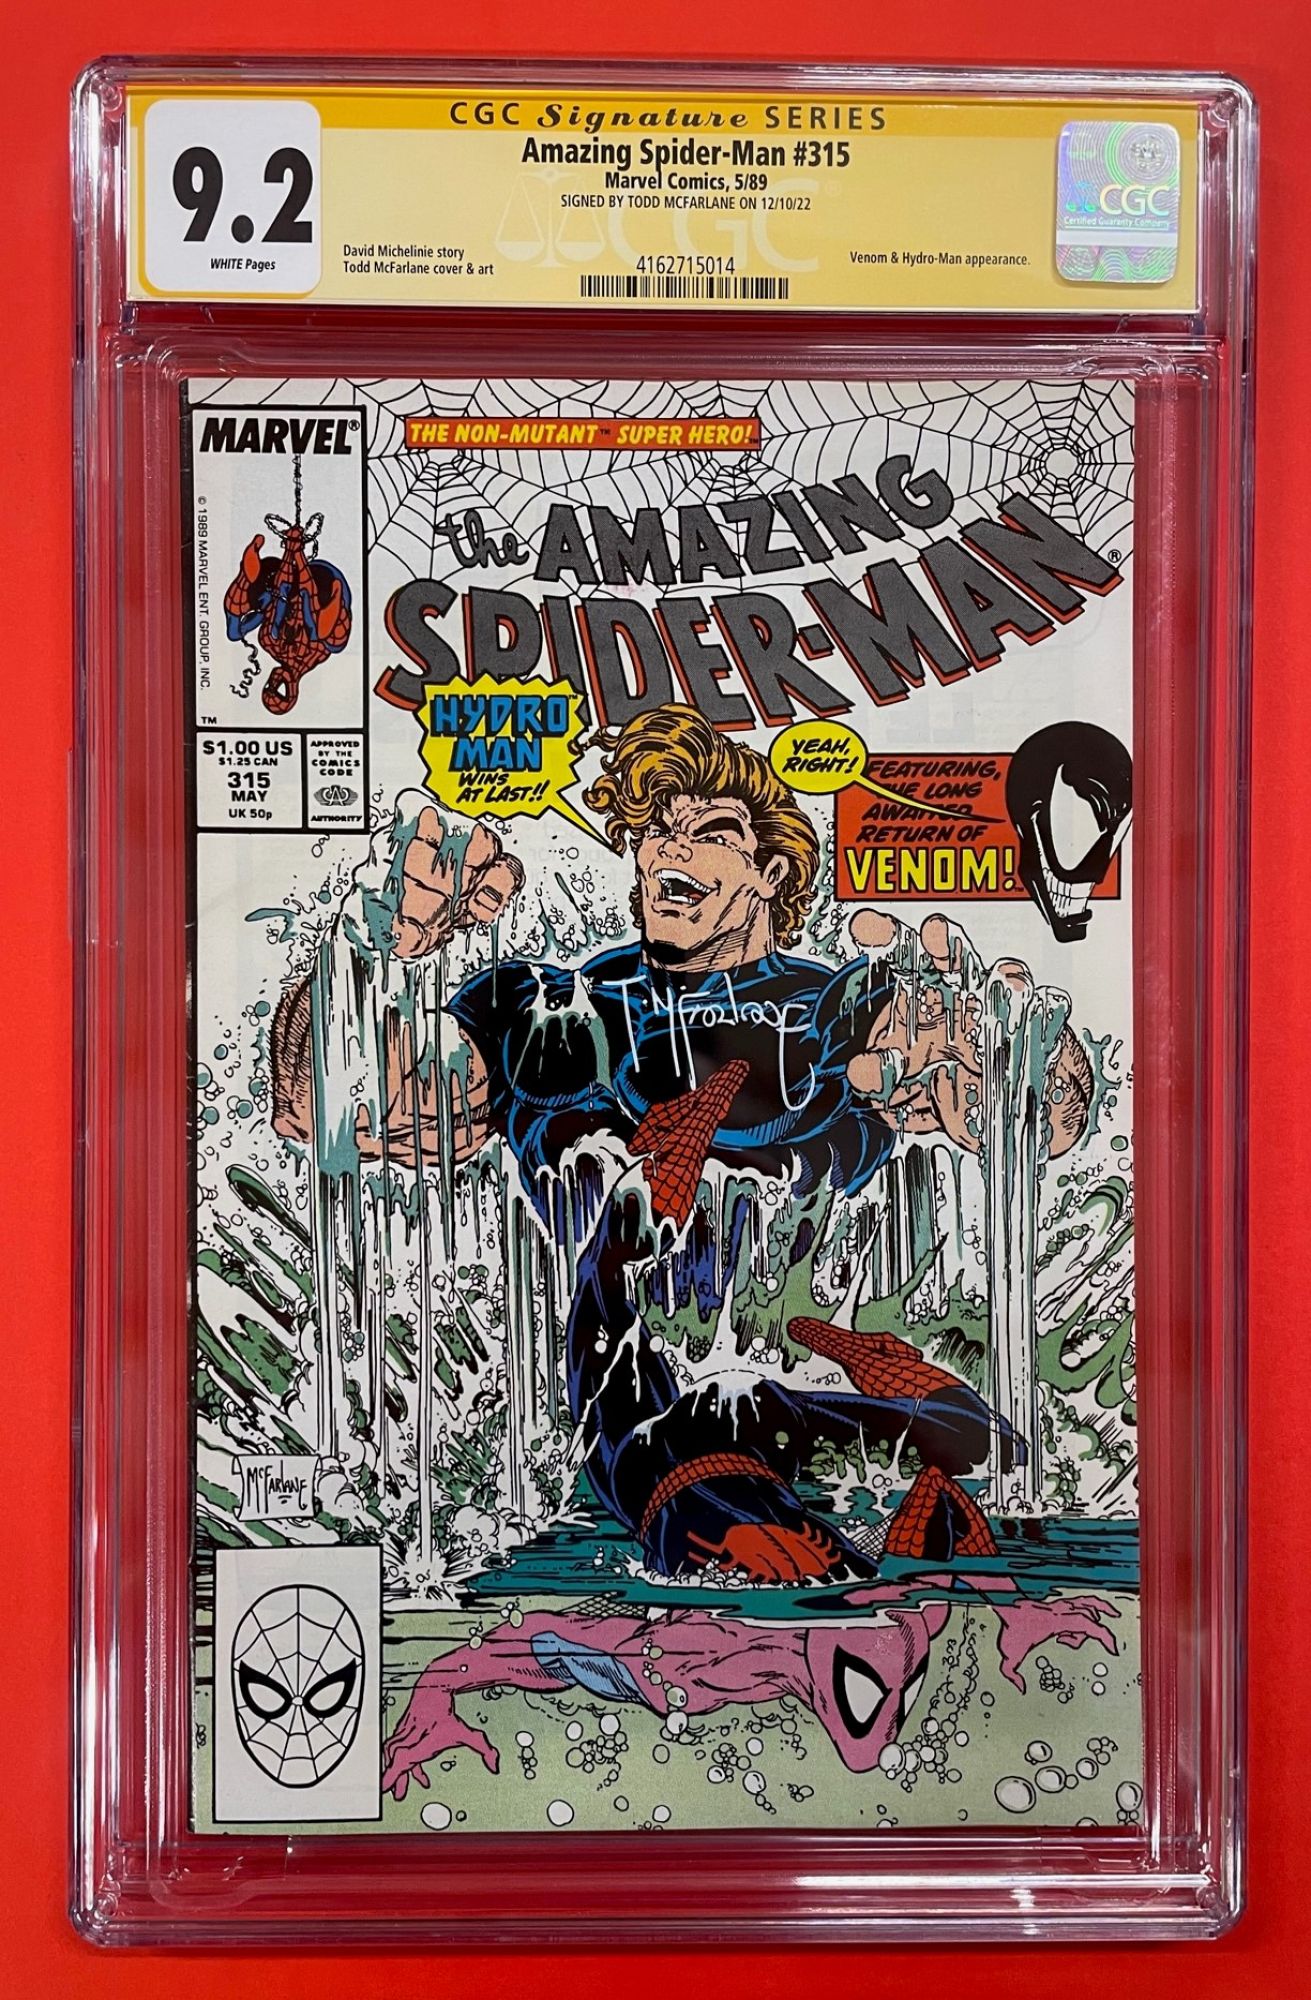 Amazing Spider-Man #315, May 1989, 9.2 NM-, CGC Signed by Todd McFarlane